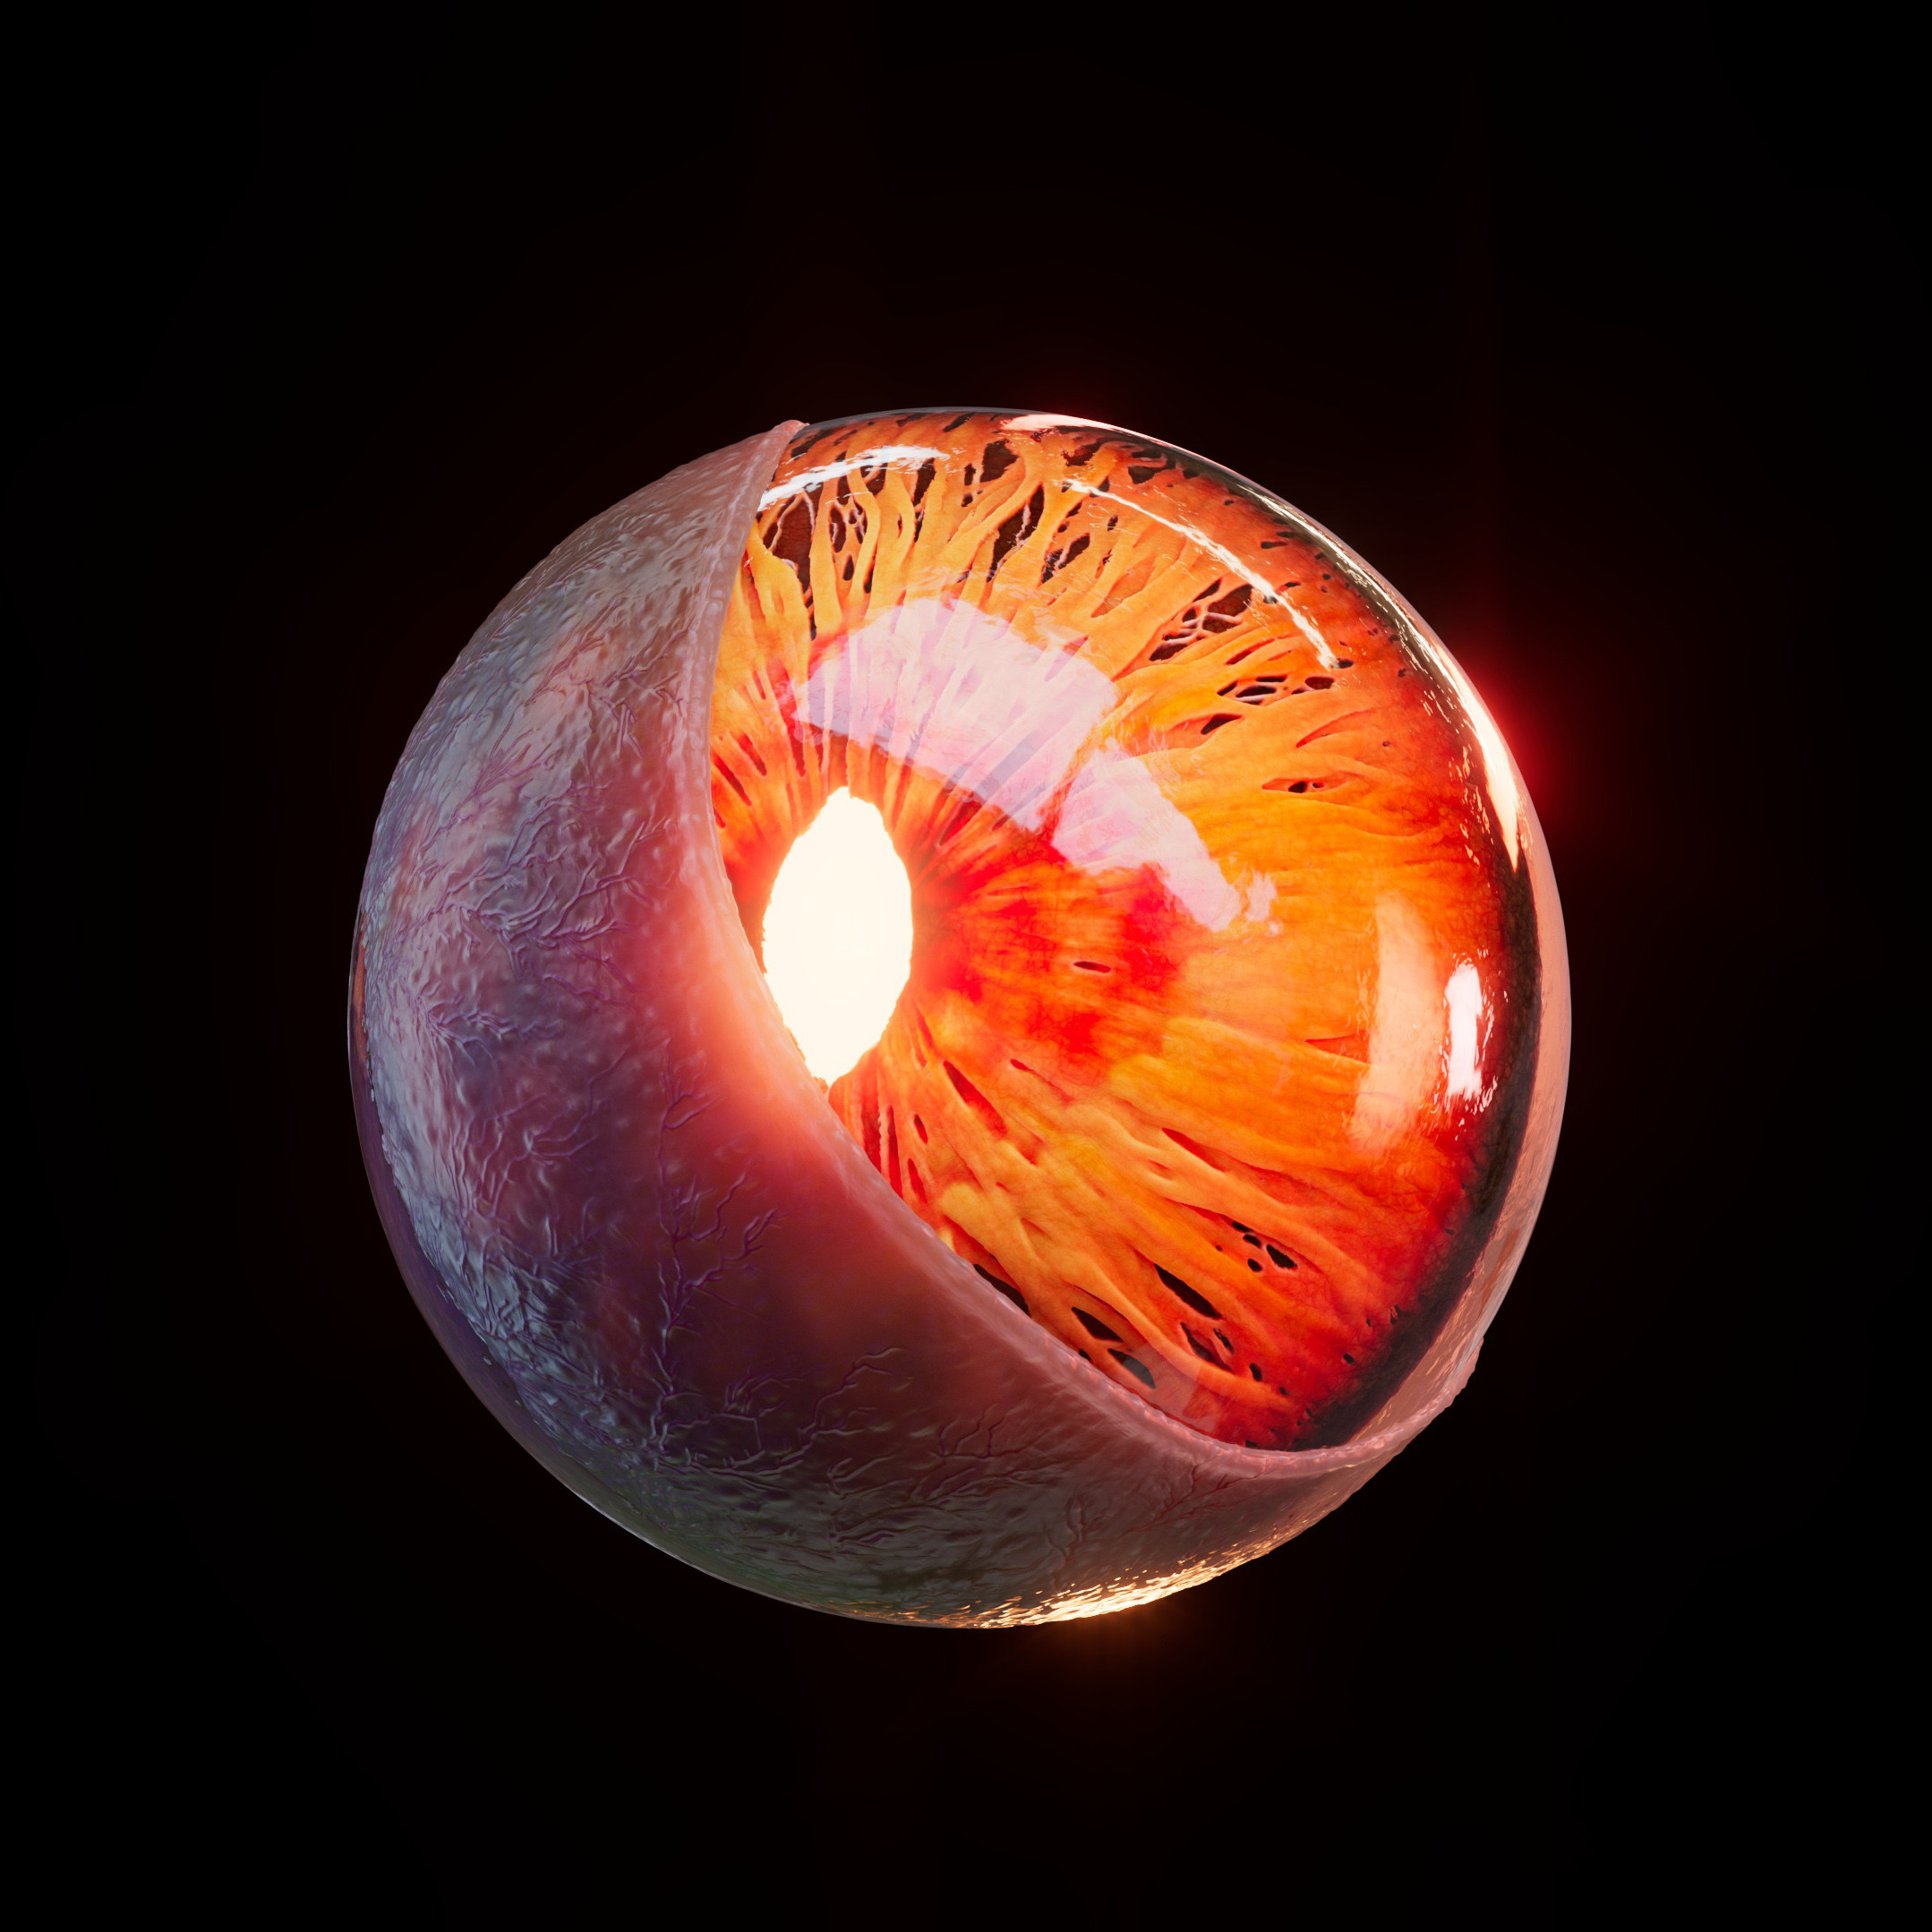 Final Eye with Iris converted to Depth/displacement map, and using Subsurface shader with all eye layers.